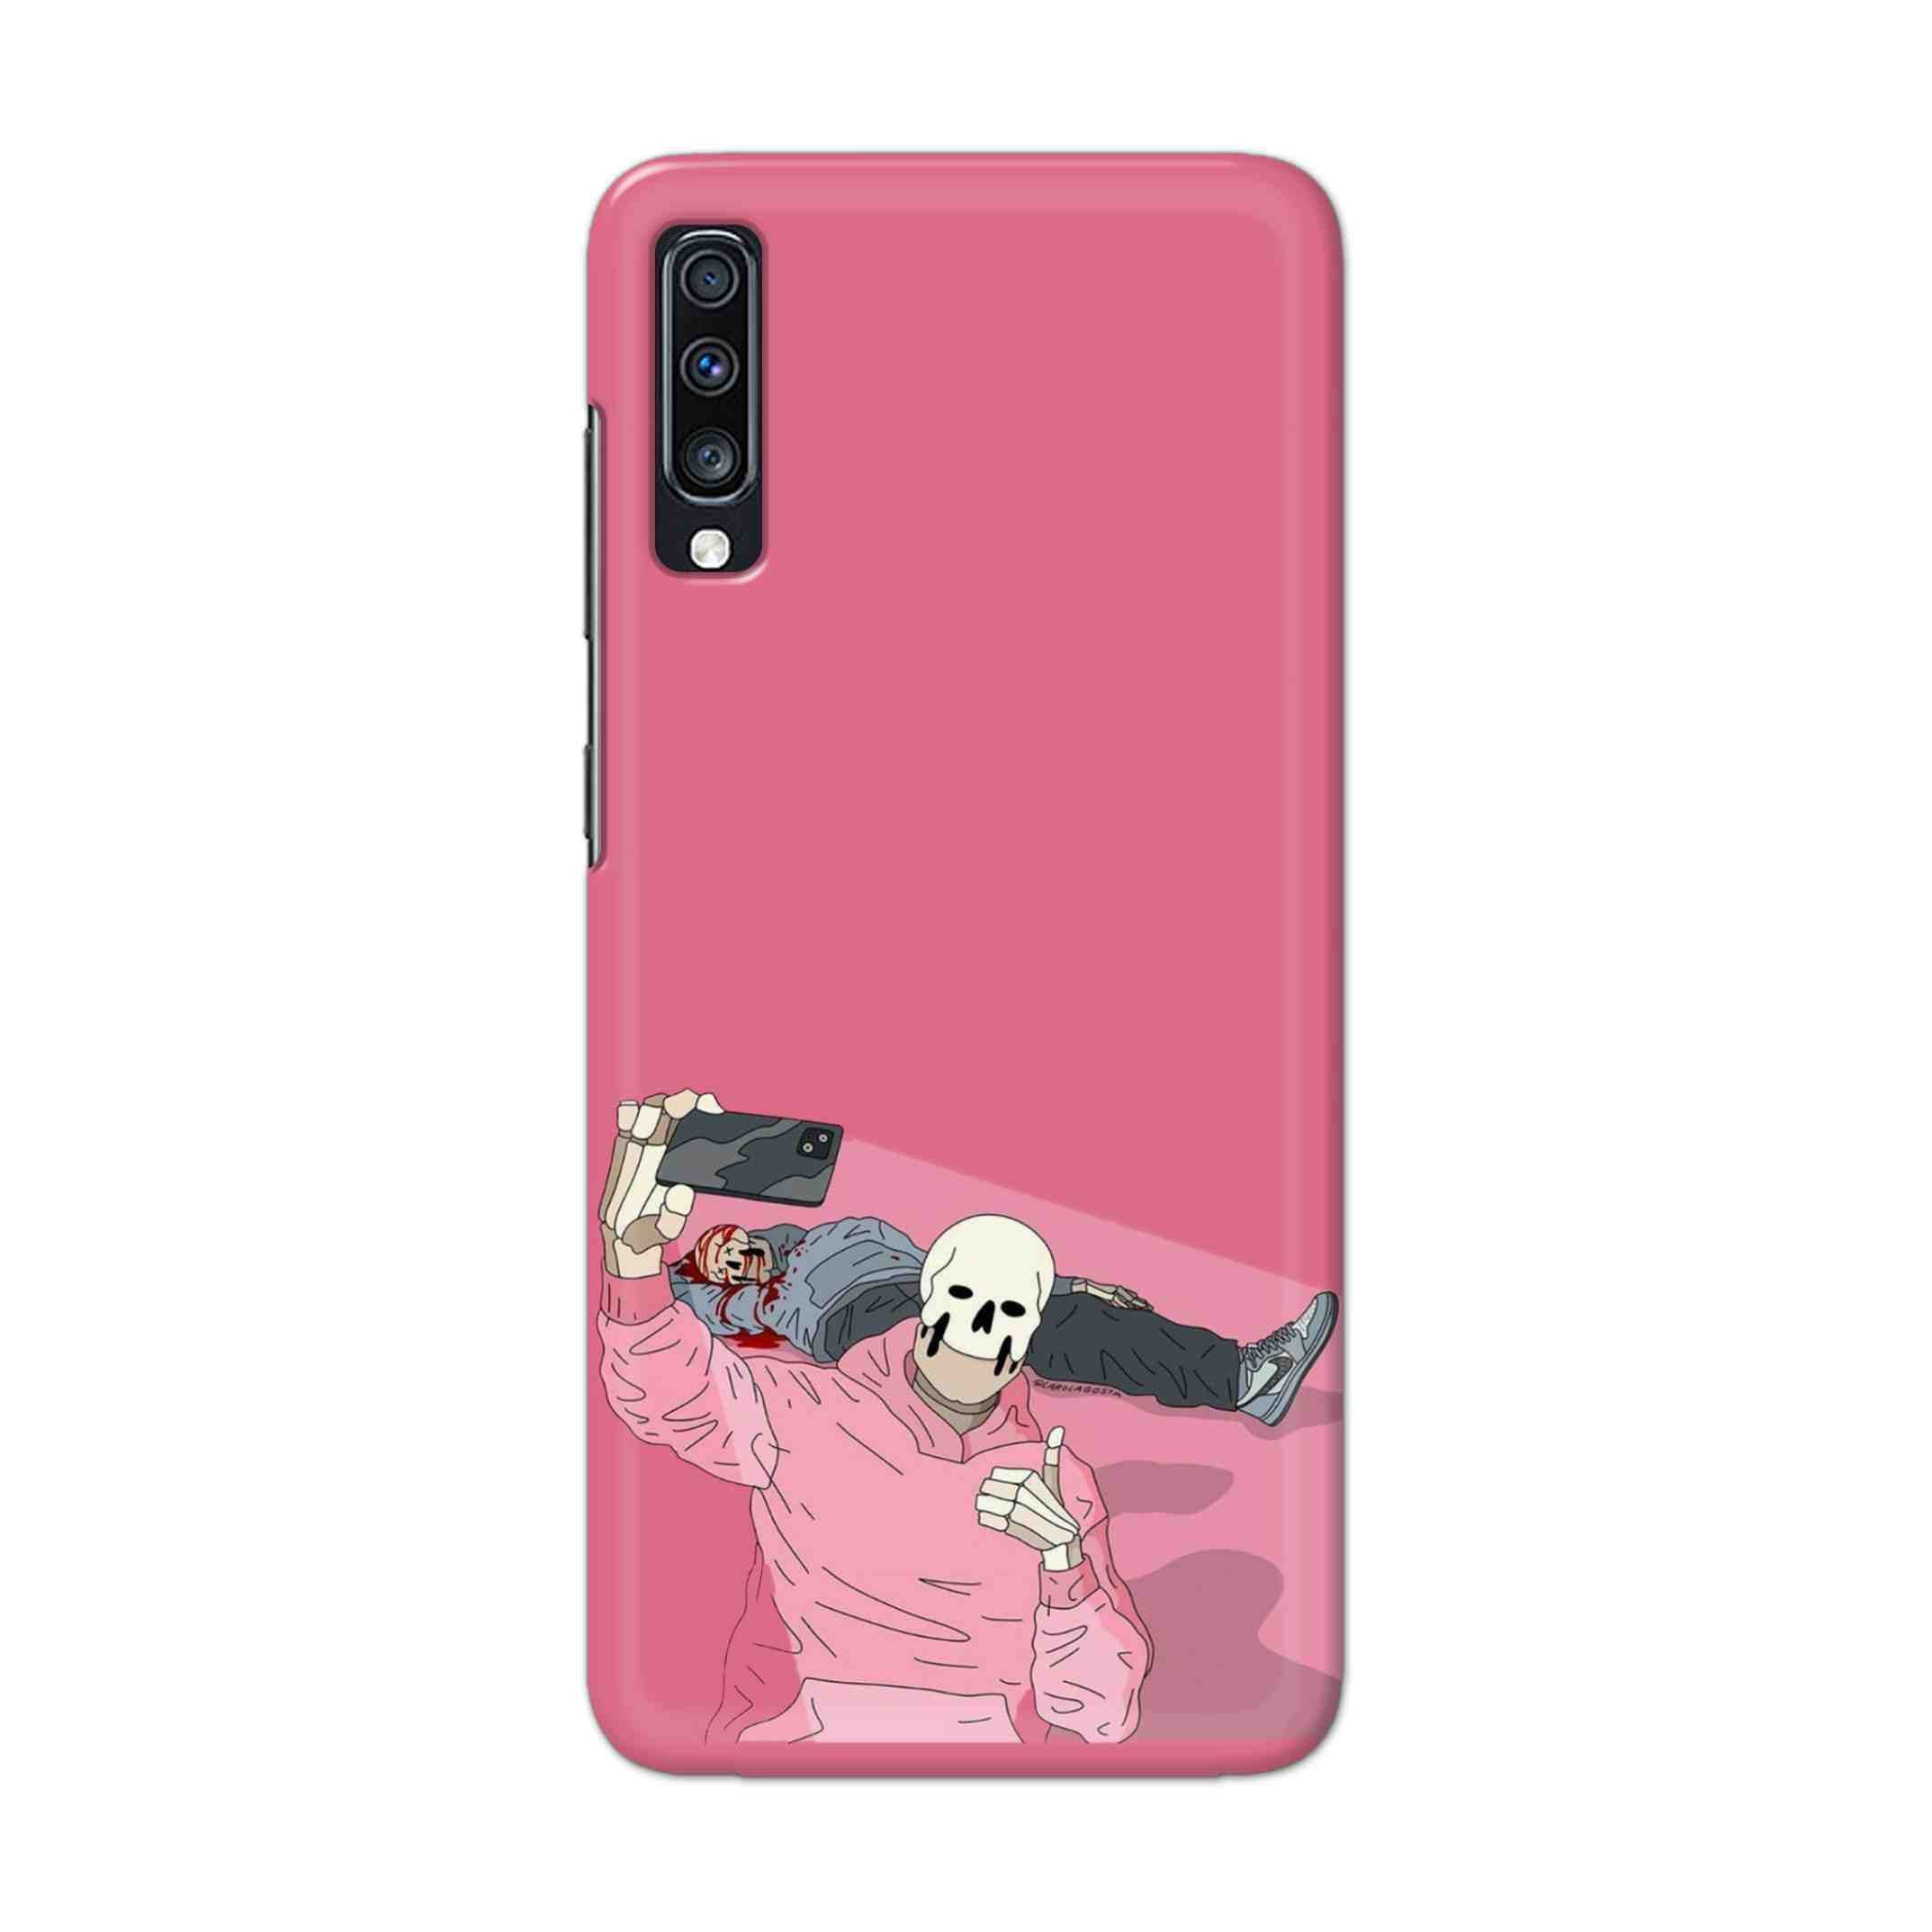 Buy Selfie Hard Back Mobile Phone Case Cover For Samsung Galaxy A70 Online